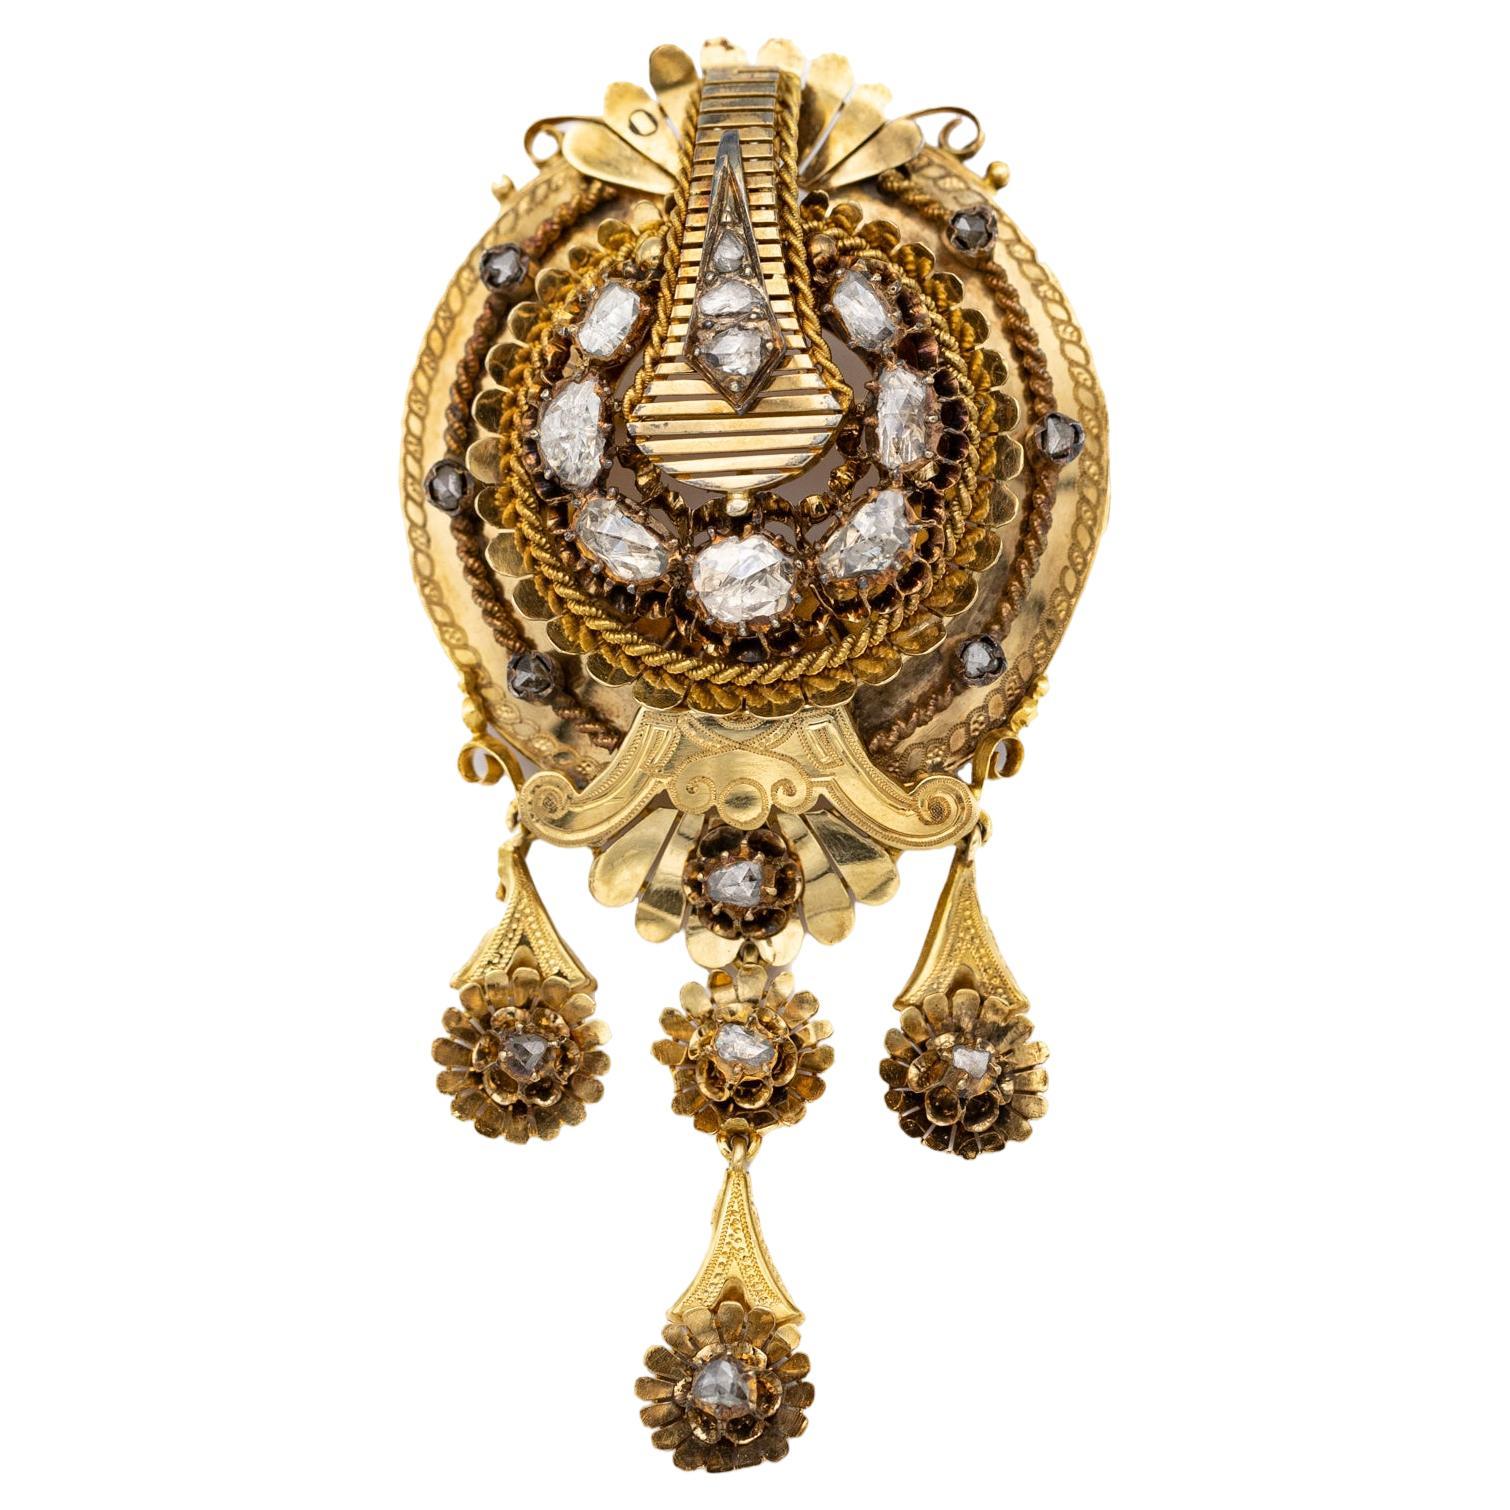 18ct yellow gold Victorian brooch - Large and heavy foiled back diamond heirloom For Sale